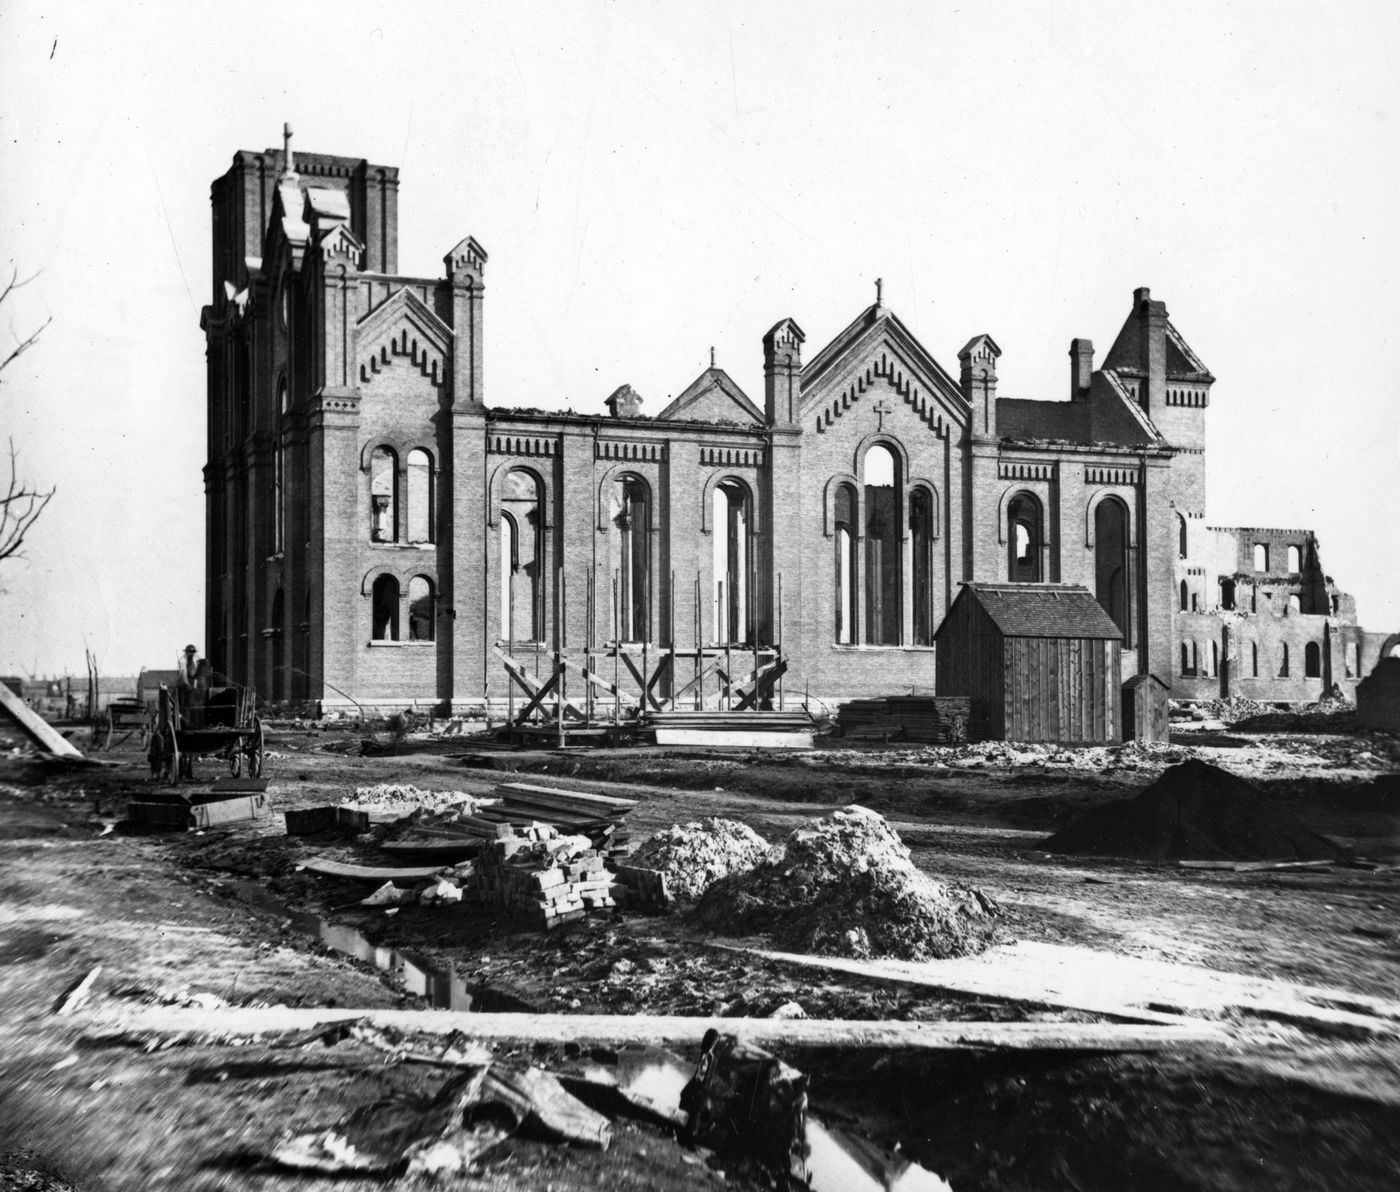 St. Michael's Church after the Great Chicago Fire in 1871.